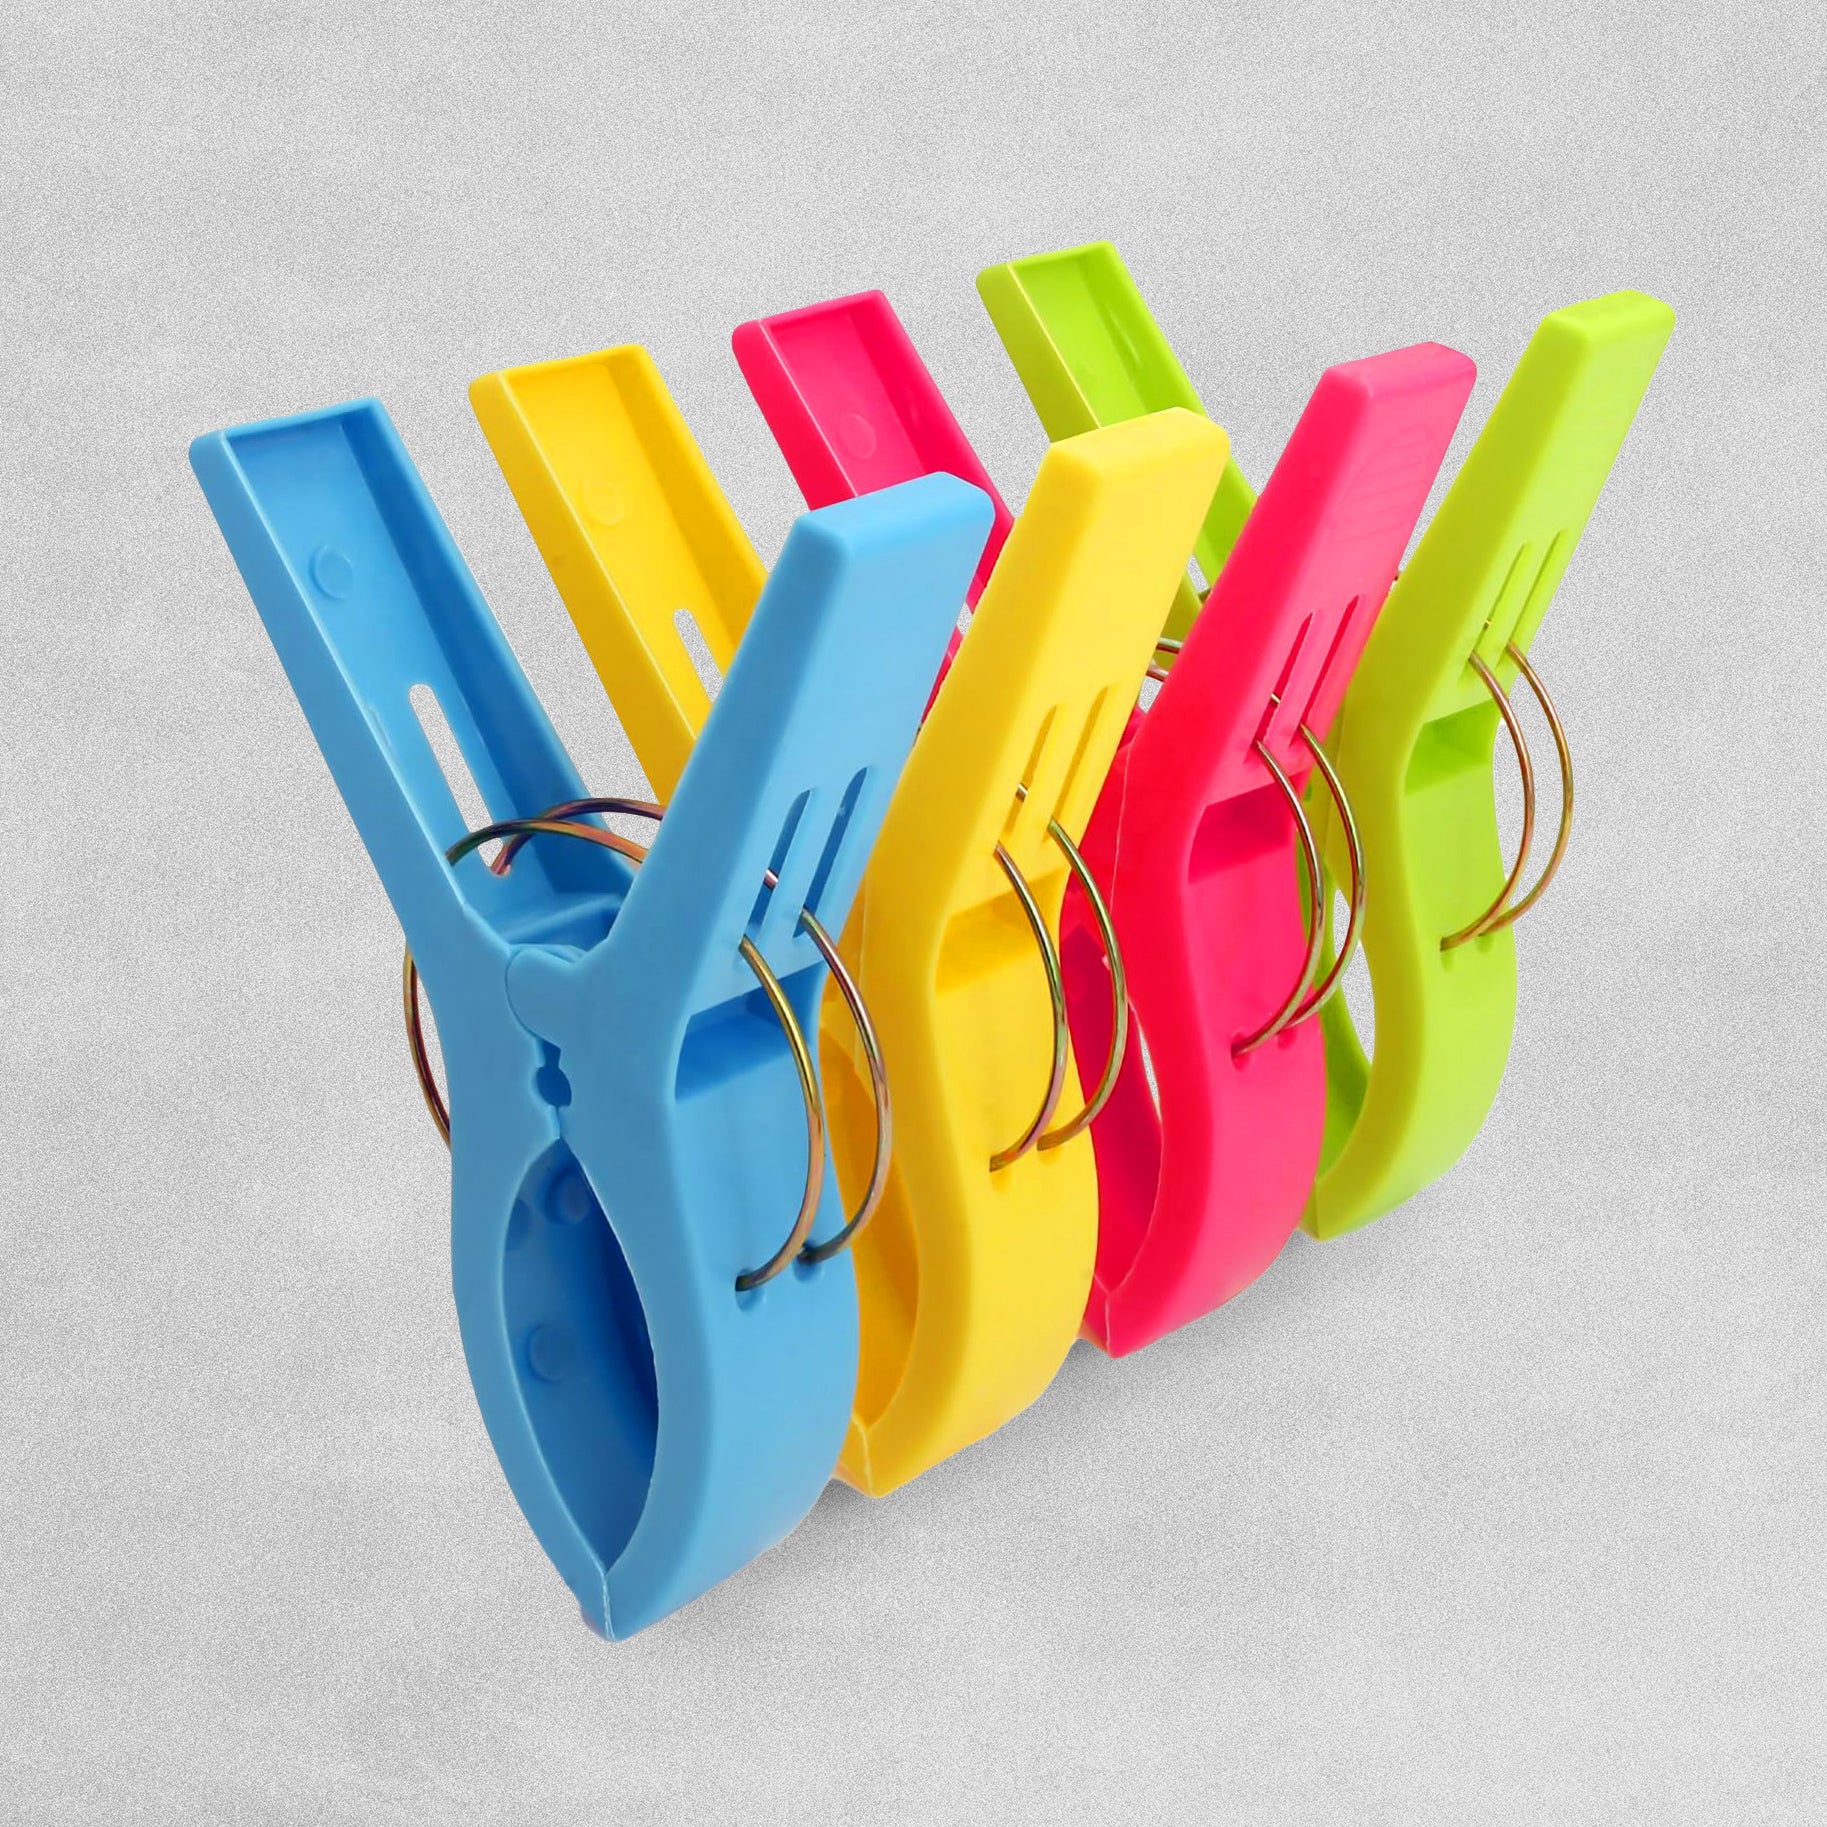 Sunbed Beach Towel Clips - Mixed Colours - 4 Pack